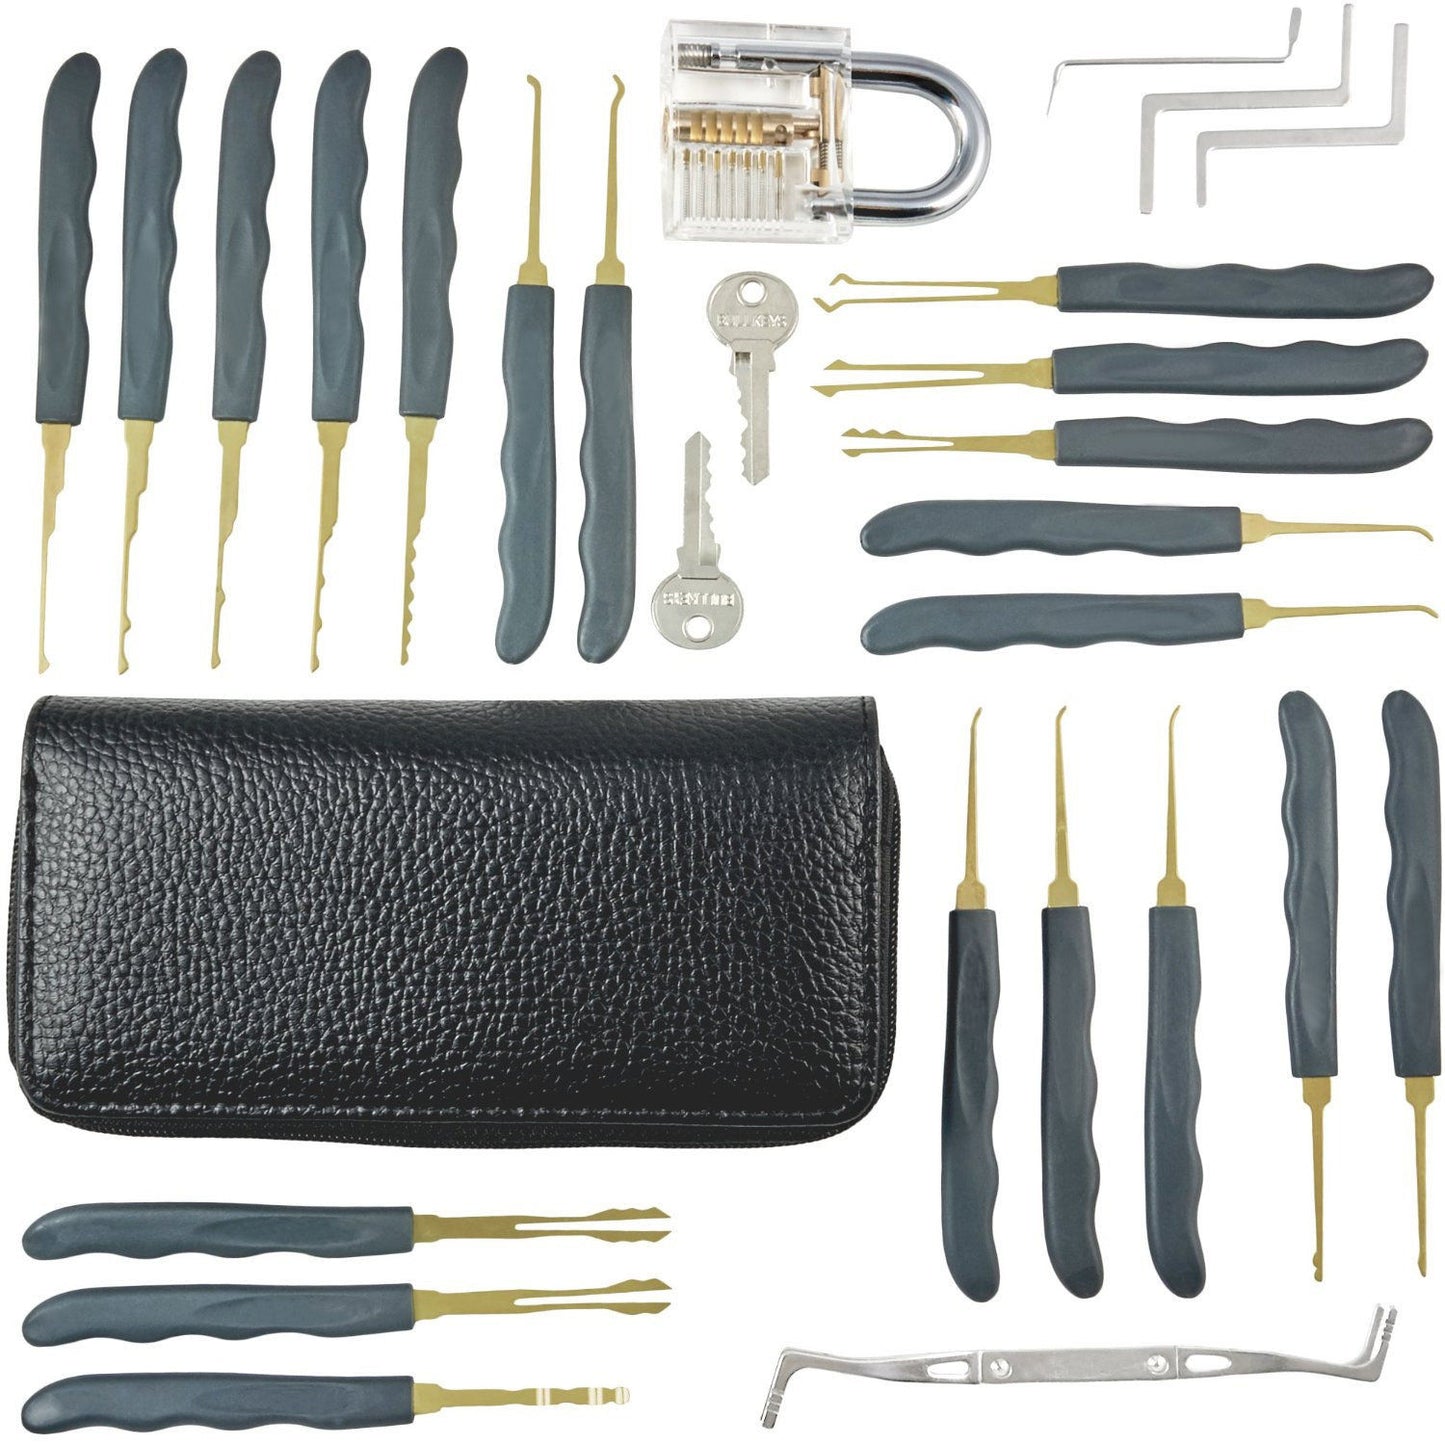 Lock Pick Set, 25pcs Lock Picking Tools with Clear Practice and Training Locks for Lockpicking, Extractor Tool for Beginner and Pro Locksmiths